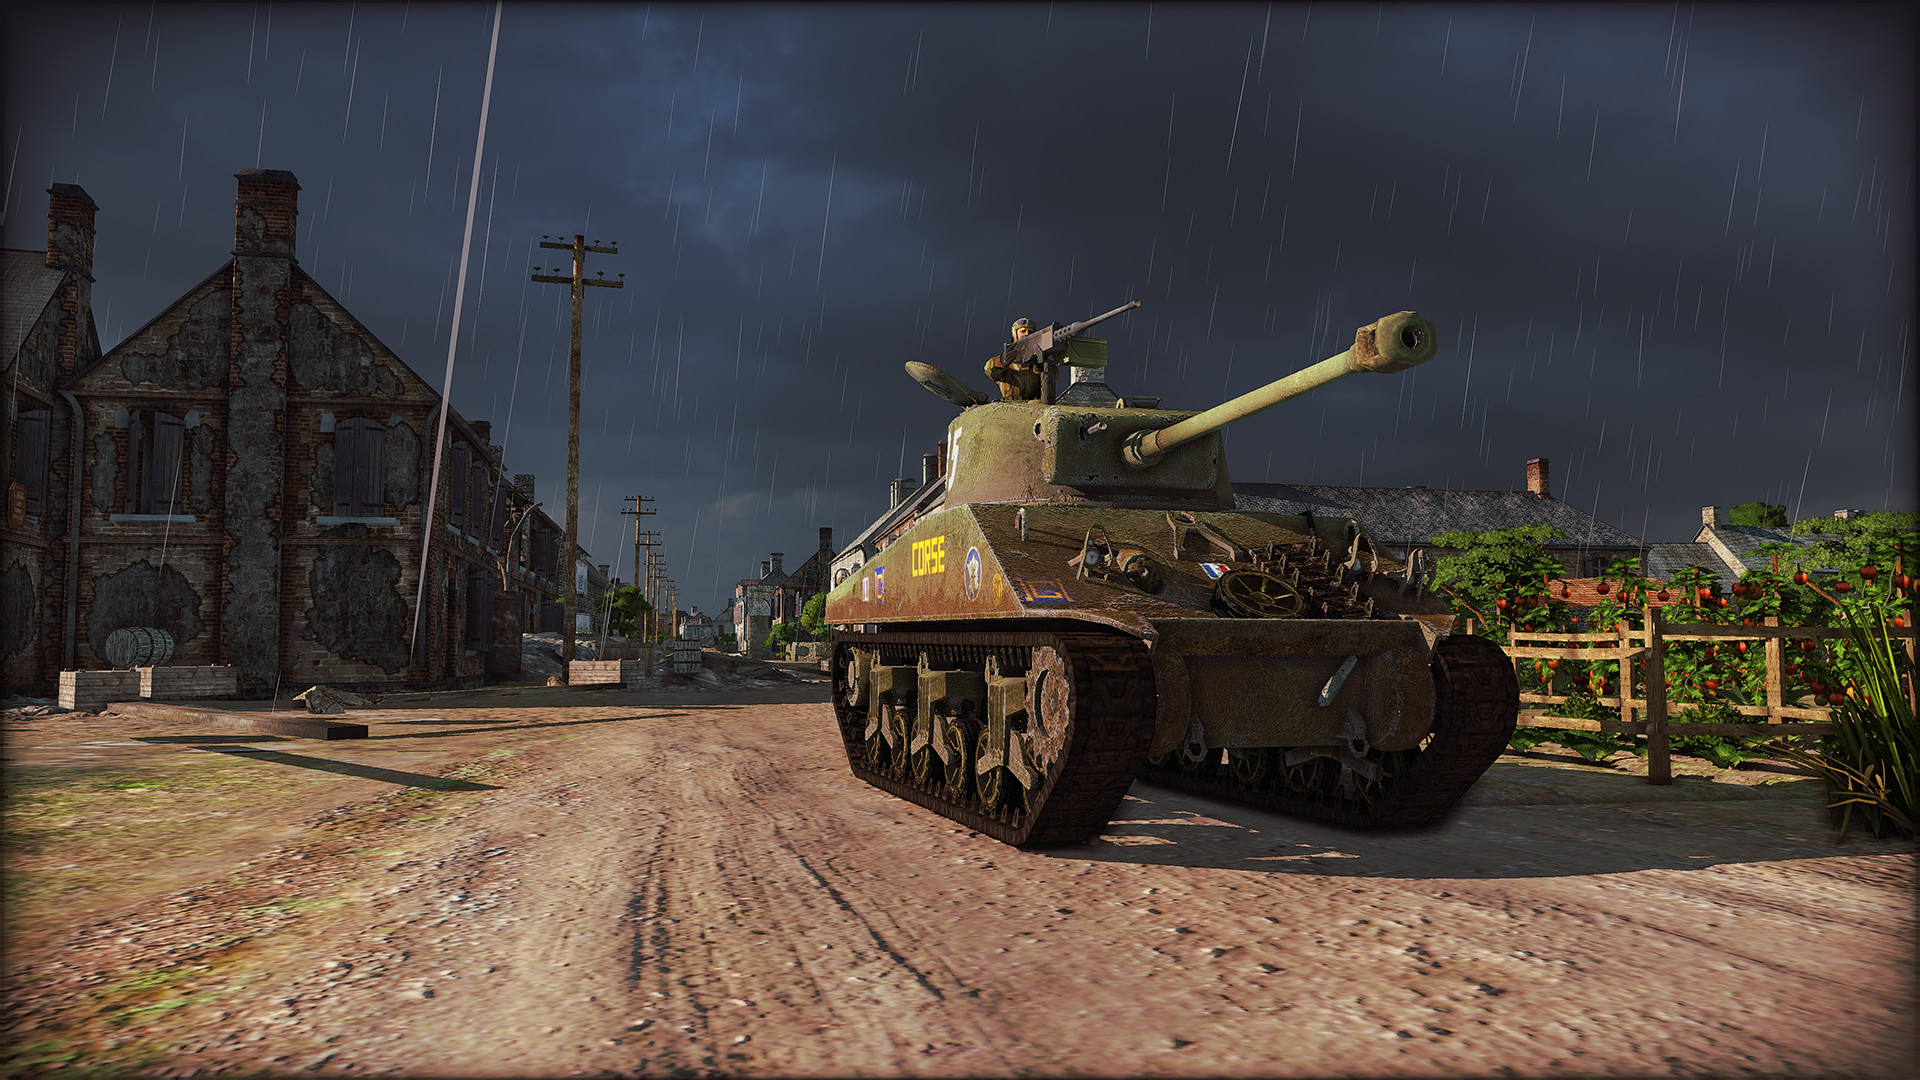 Steel Division: Normandy 44 on Steam